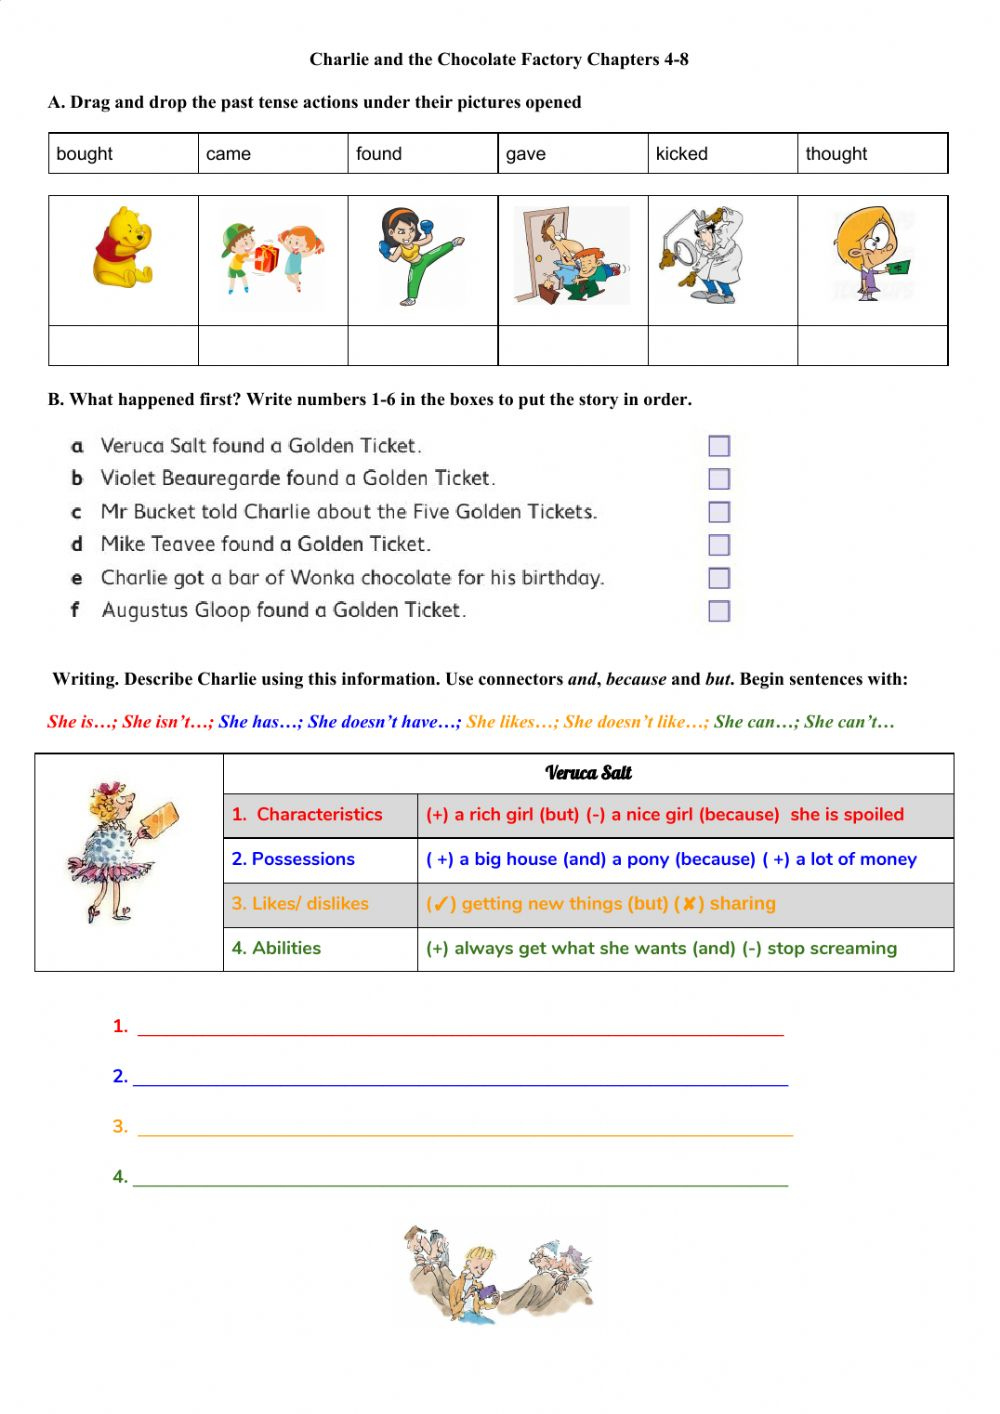 charlie-and-the-chocolate-factory-worksheets-printable-lyana-worksheets